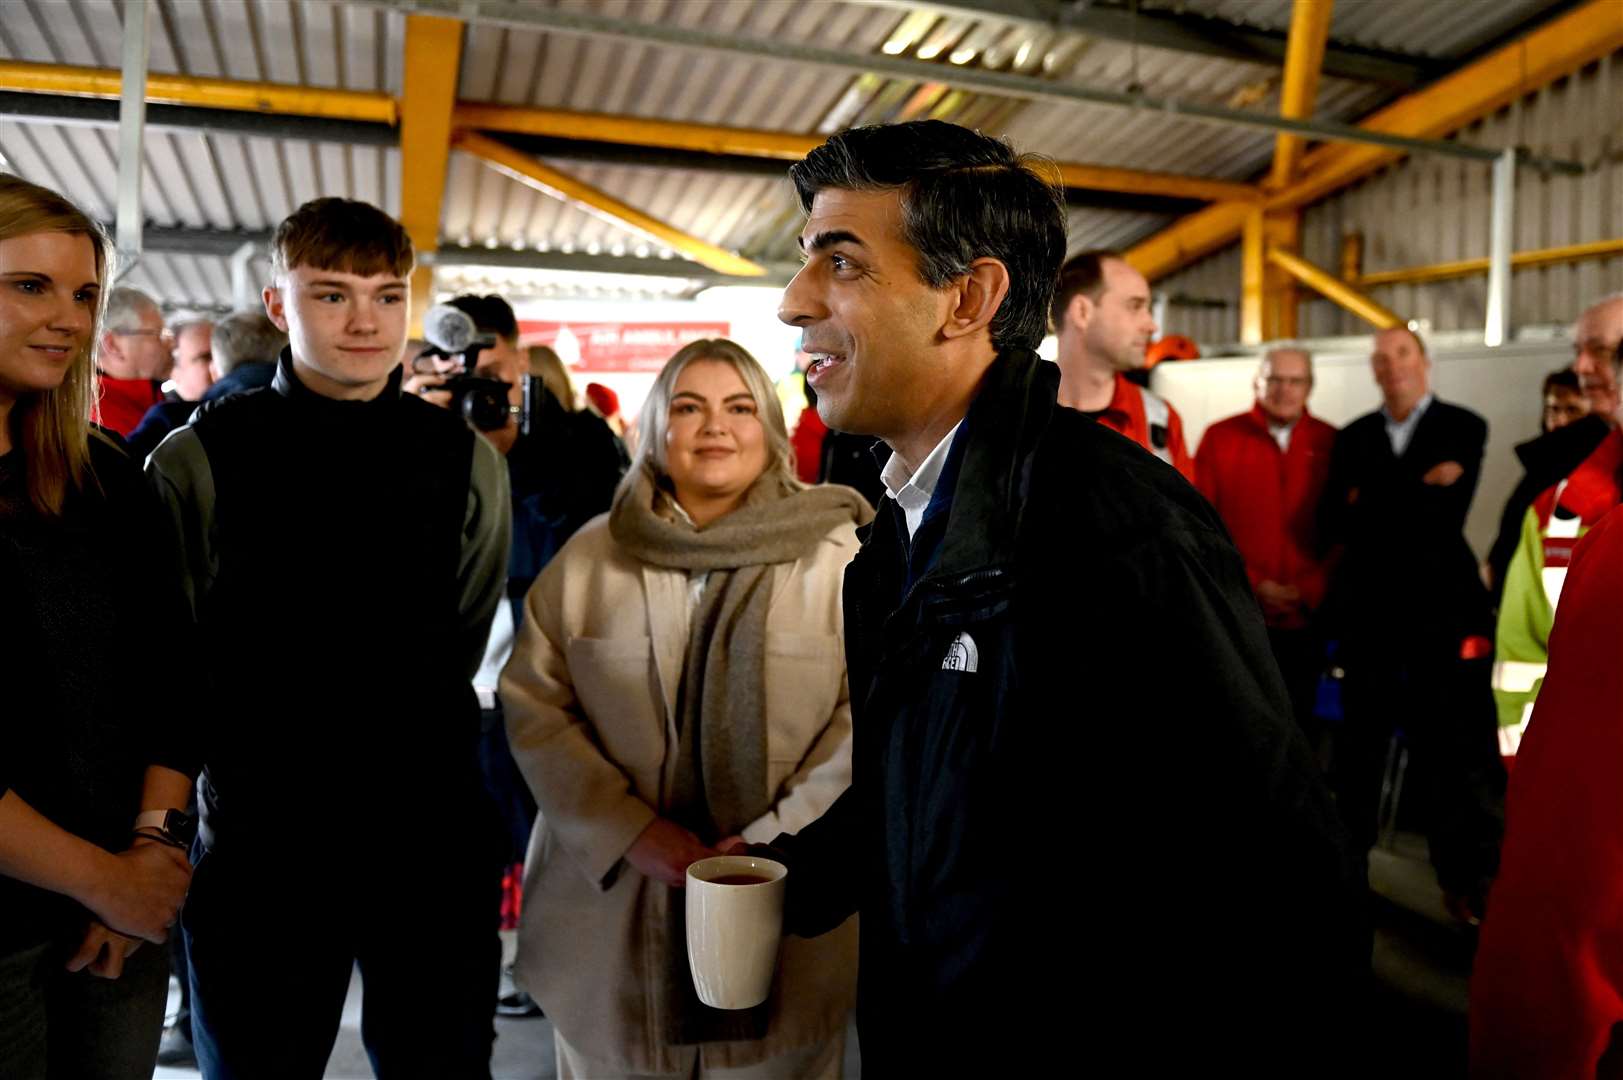 Prime Minister Rishi Sunak is currently visiting Northern Ireland (Carrie Davenport/PA)